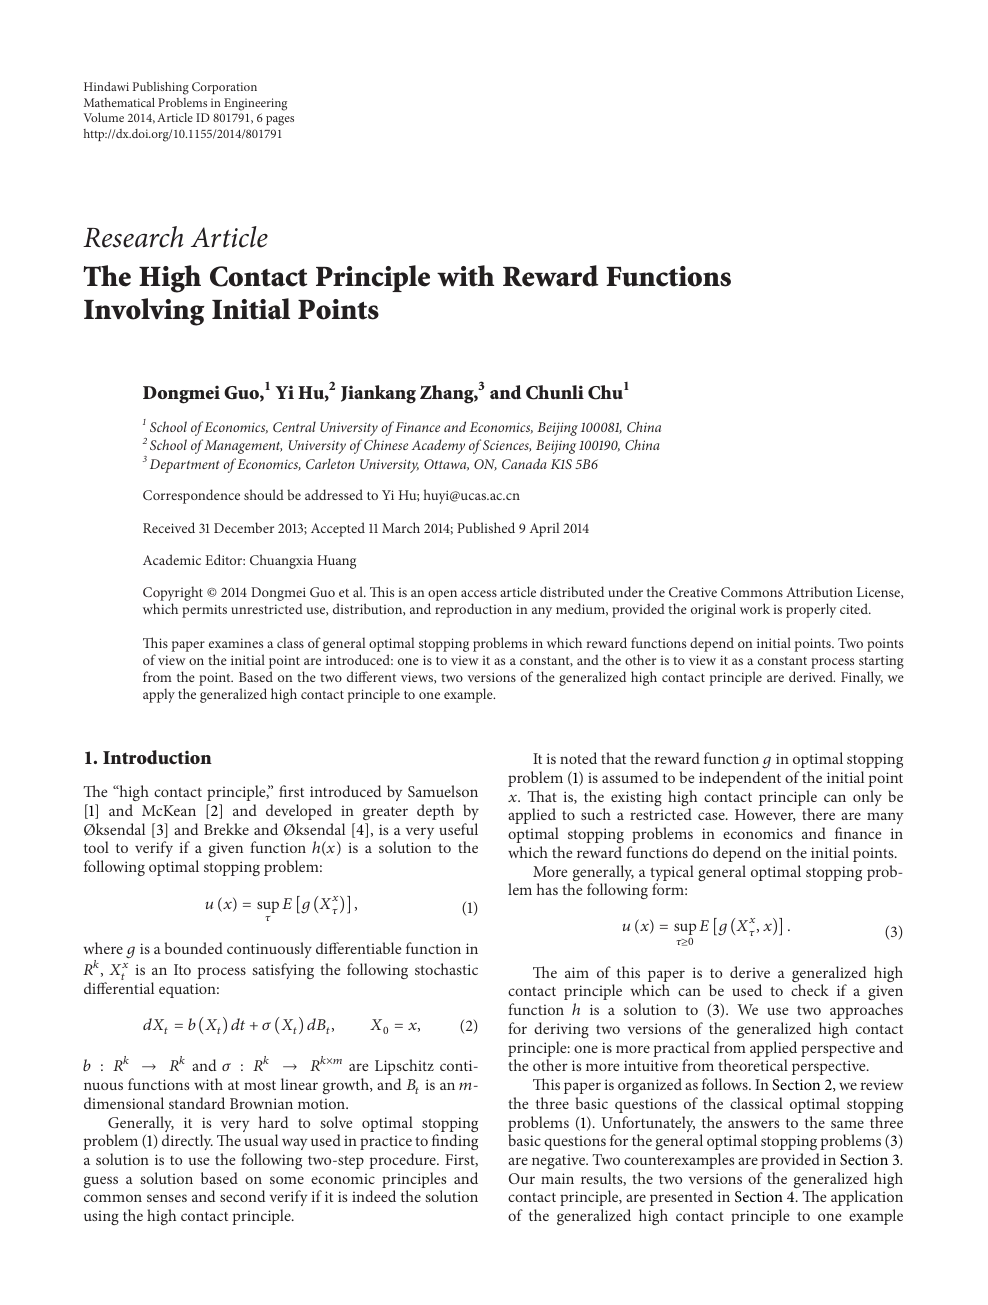 The High Contact Principle With Reward Functions Involving Initial Points Topic Of Research Paper In Mathematics Download Scholarly Article Pdf And Read For Free On Cyberleninka Open Science Hub